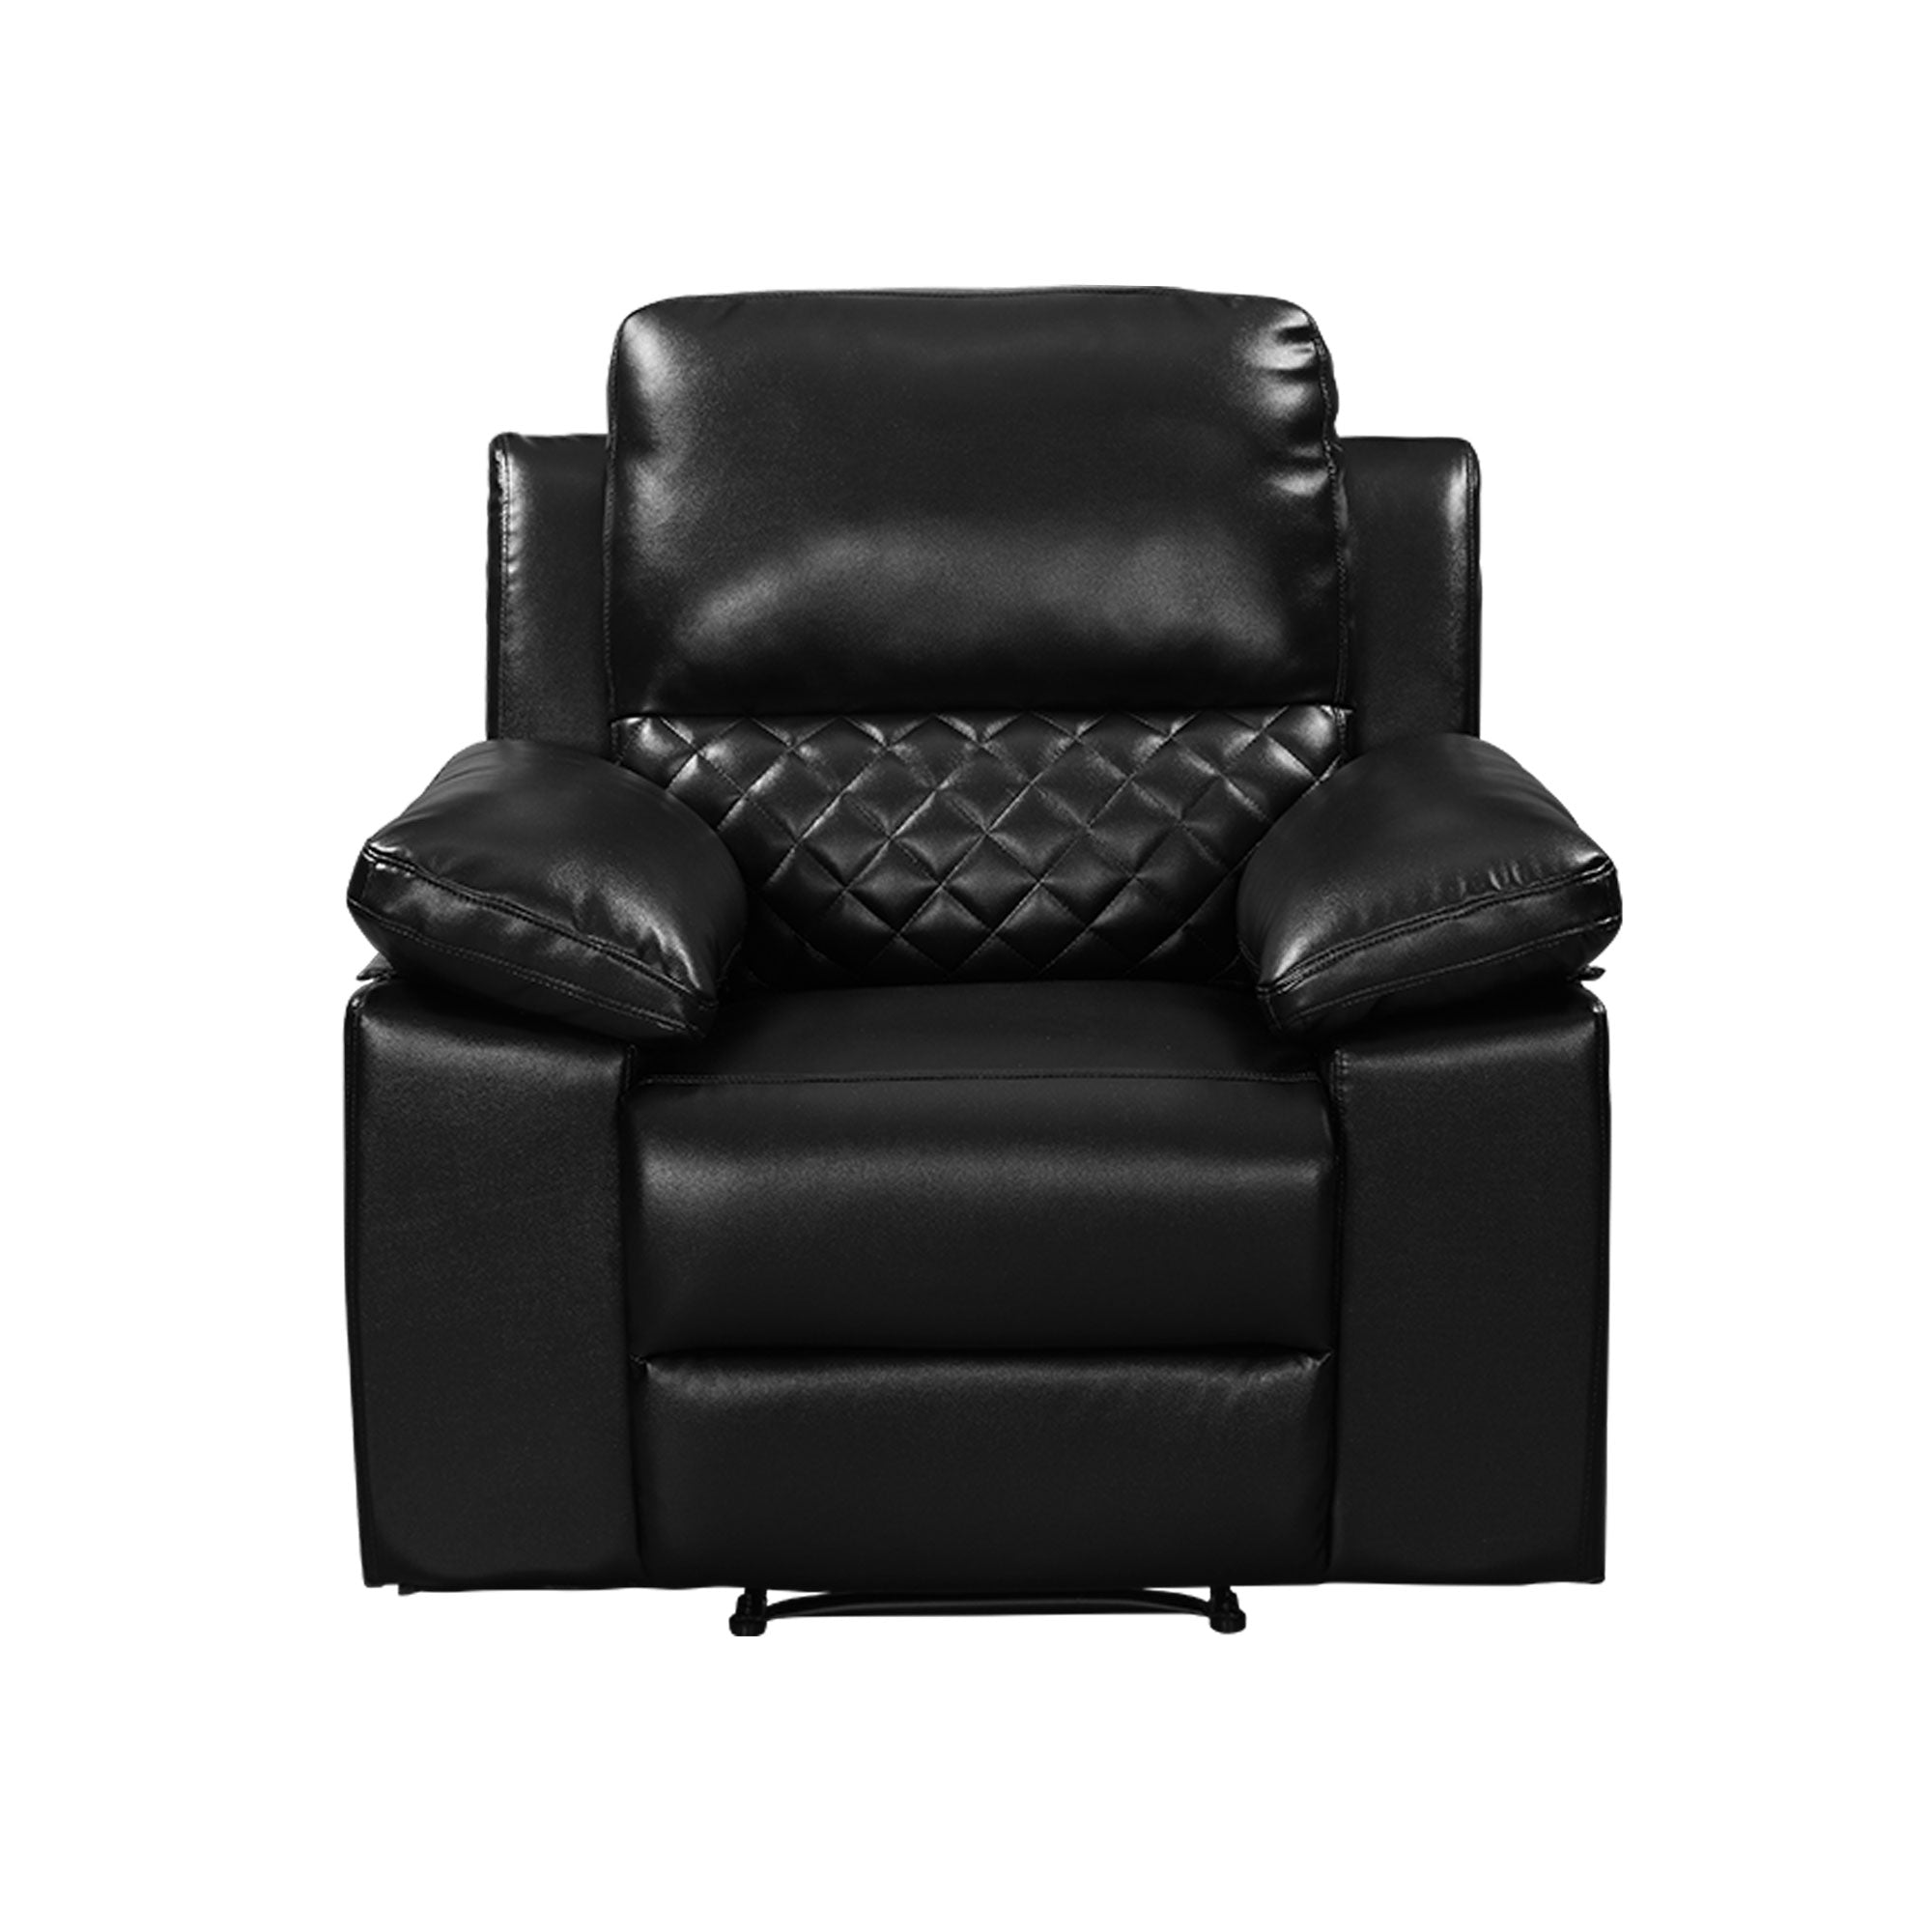 Modern Design Air Leather and PVC Manual Recliner Chair Home Theater Seating-Boyel Living